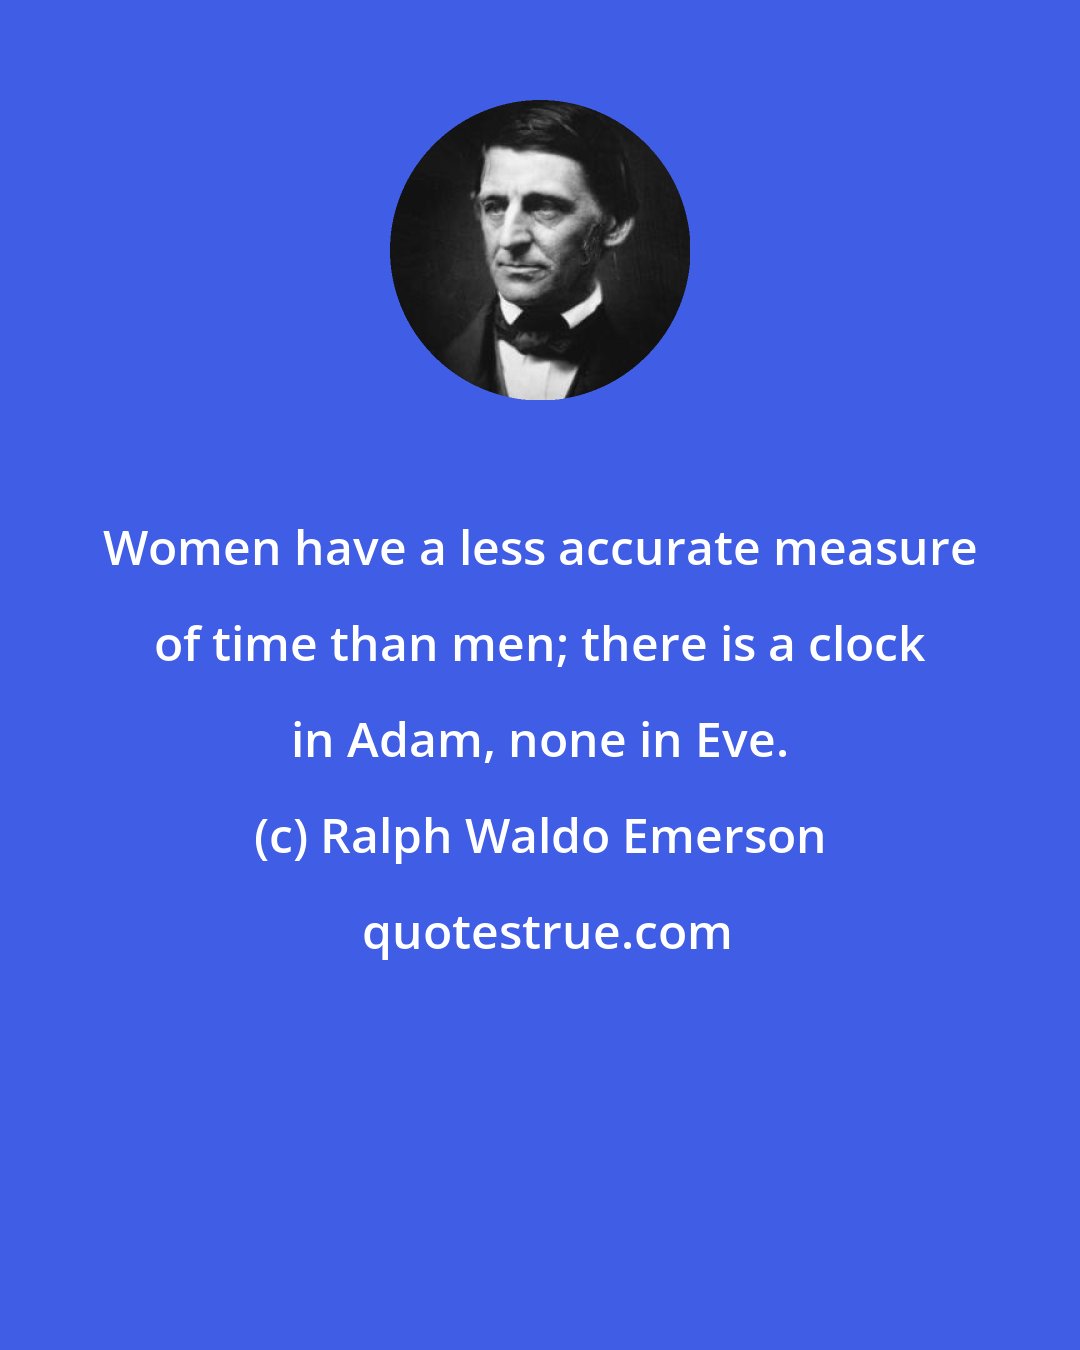 Ralph Waldo Emerson: Women have a less accurate measure of time than men; there is a clock in Adam, none in Eve.